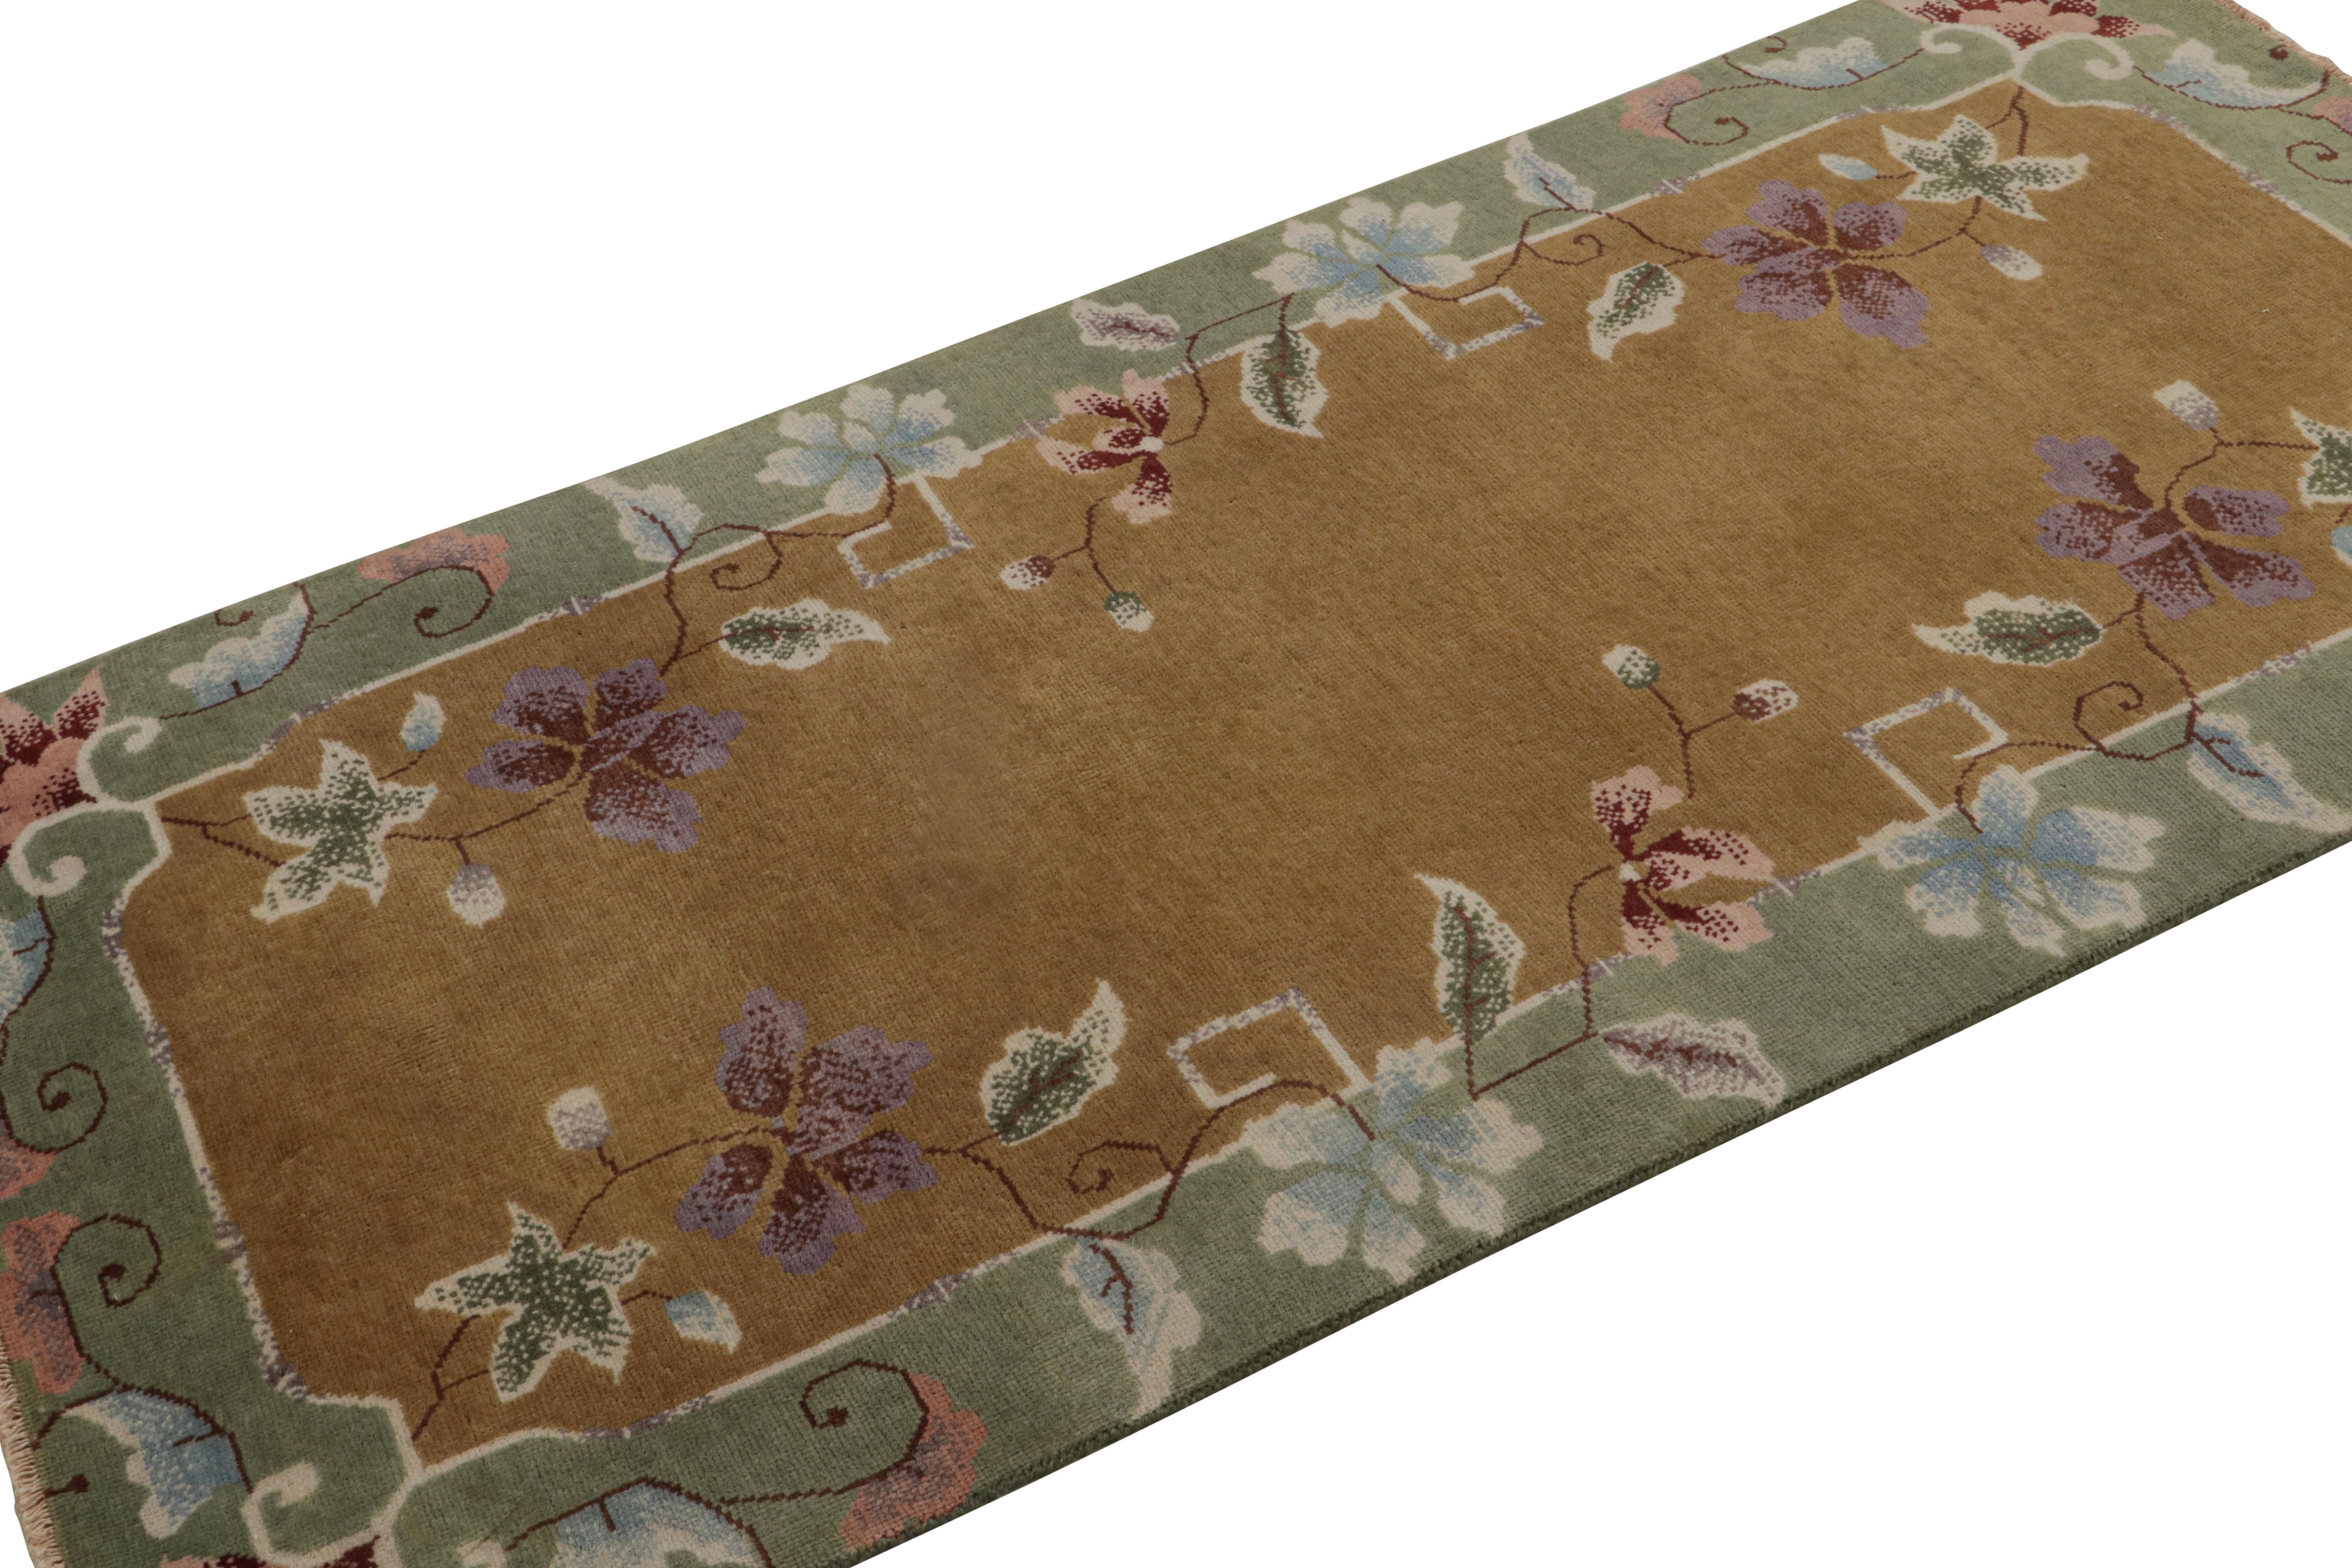 Hand-knotted in wool and cotton, this 3x6 scatter rug by Rug & Kilim is a new addition to their Chinese Art Deco rug line.

On the Design: 

The rug enjoys a golden-brown open field with green borders marrying floral patterns in light blue and pink